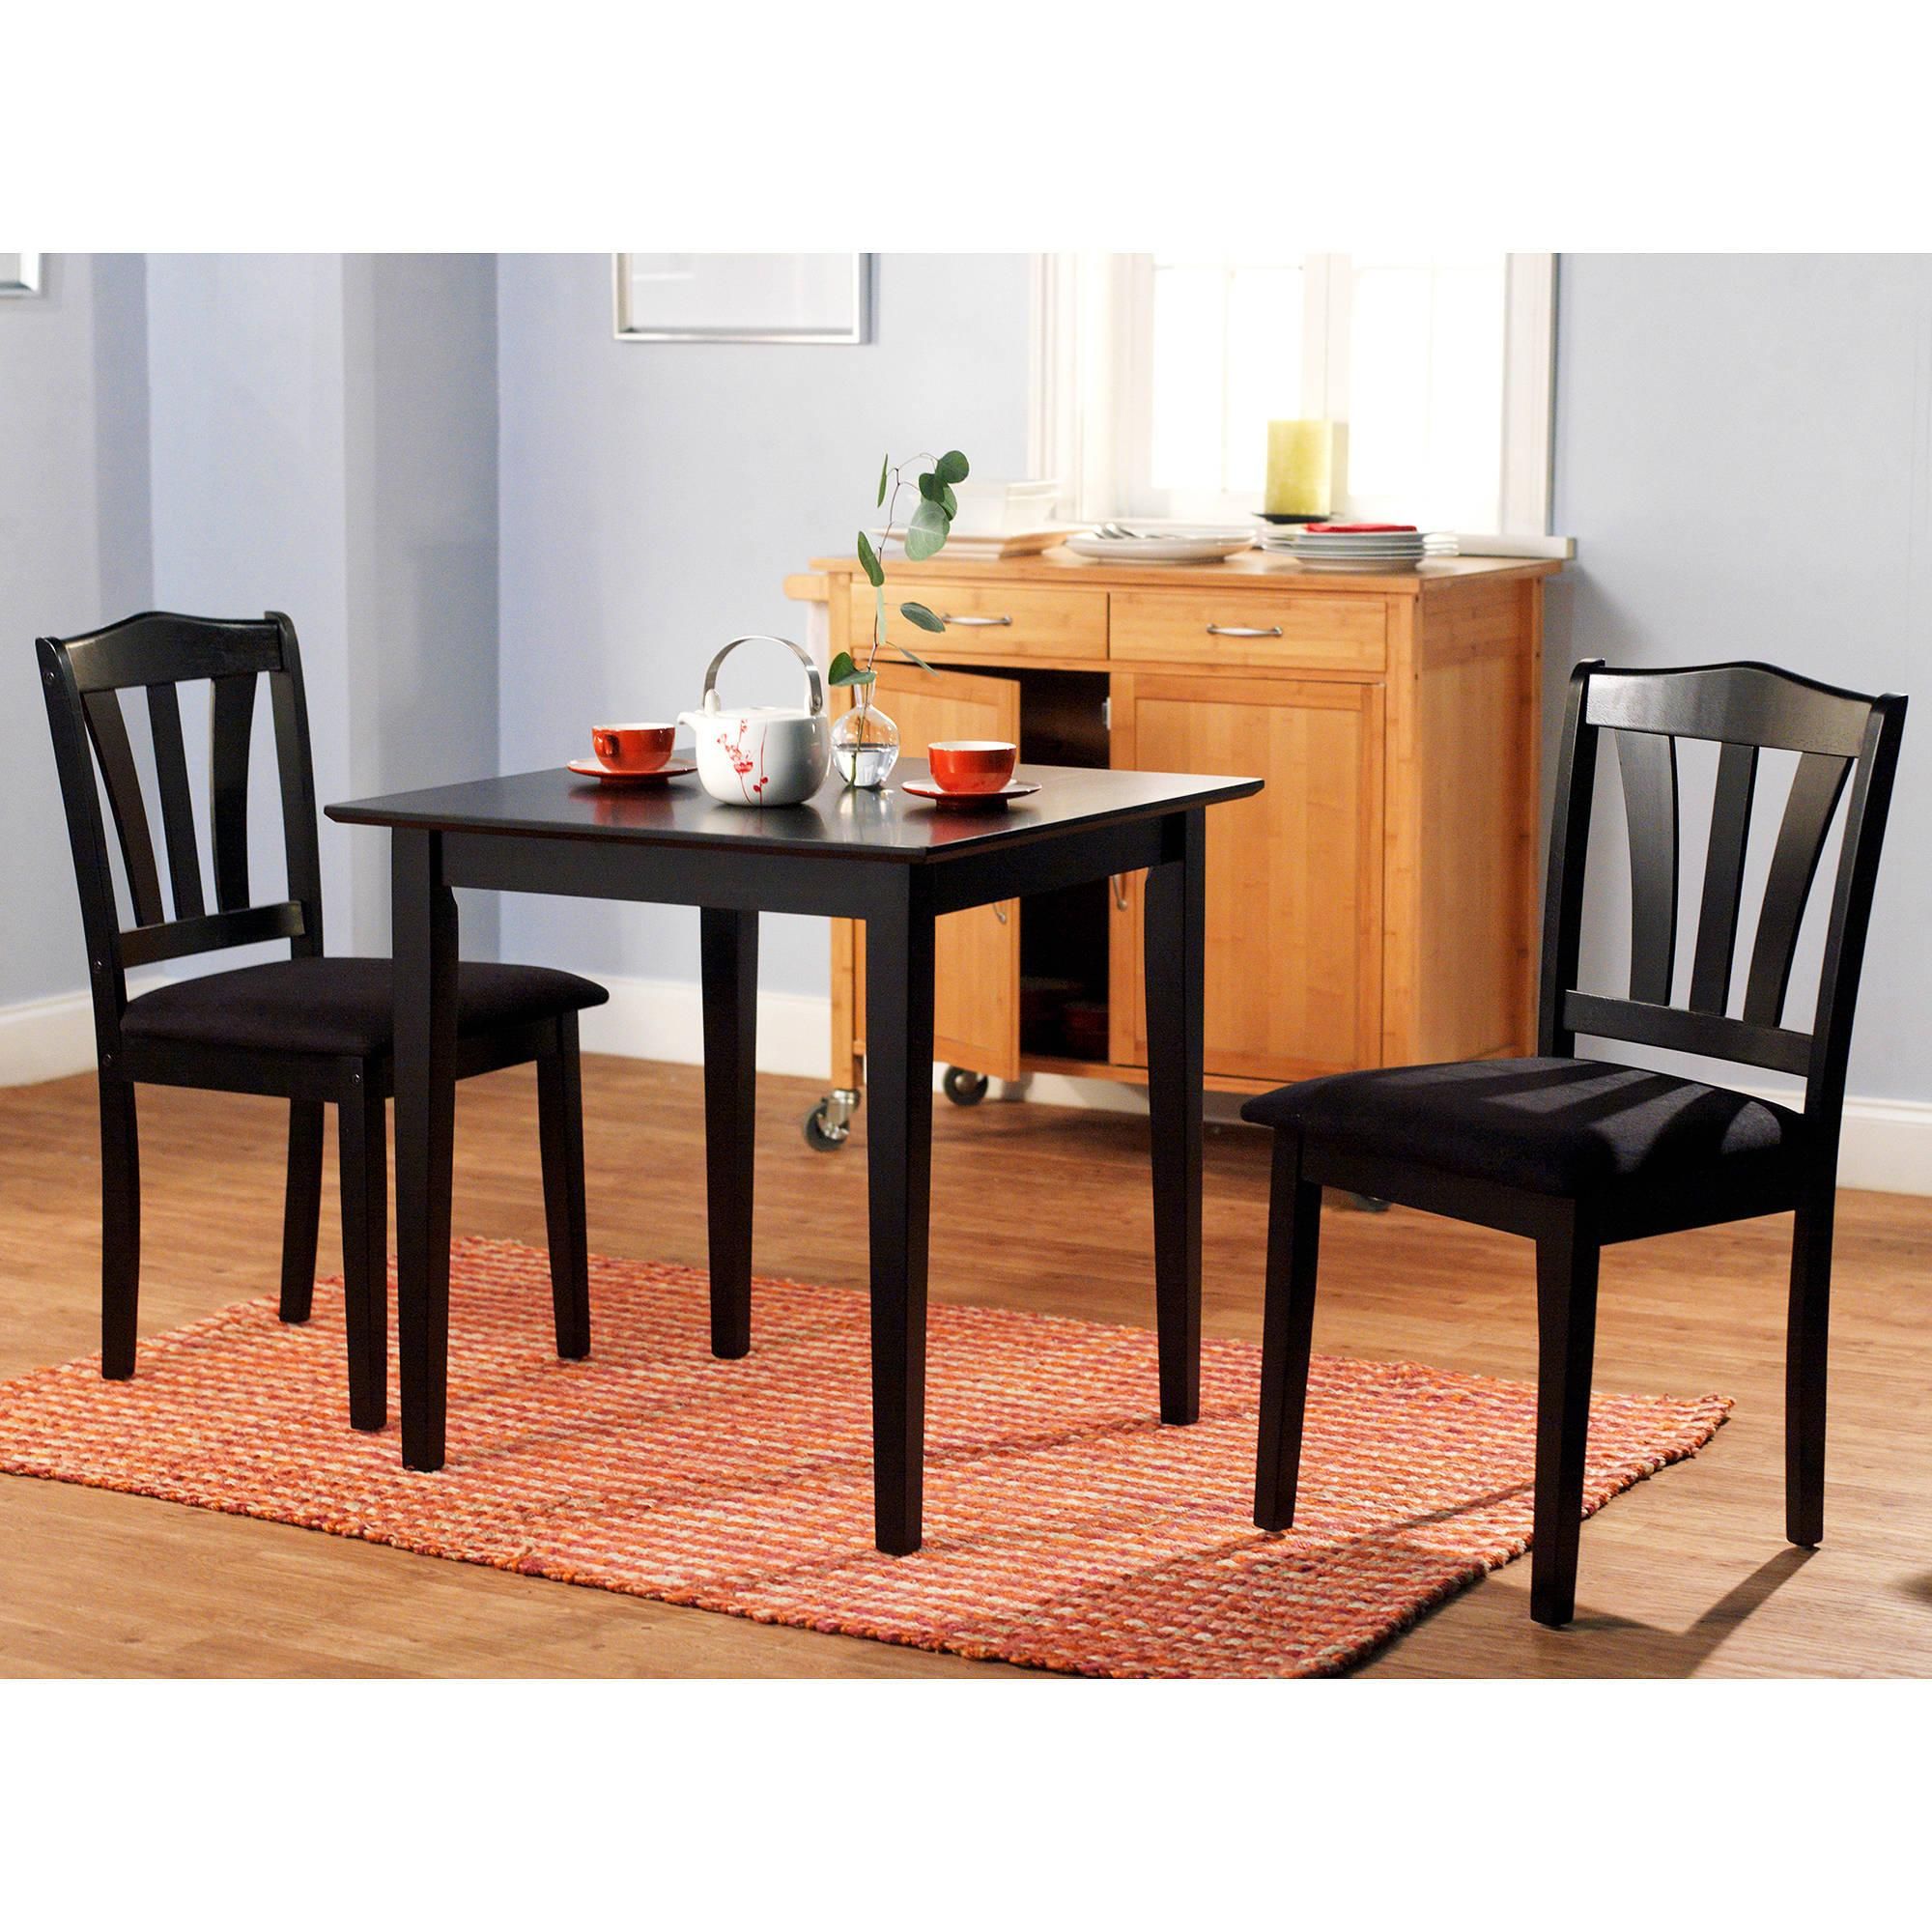 Details About 3 Piece Dining Set Table 2 Chairs Kitchen Room Wood Furniture  Dinette Modern New Pertaining To Most Recent 3 Piece Dining Sets (Photo 35475 of 35622)